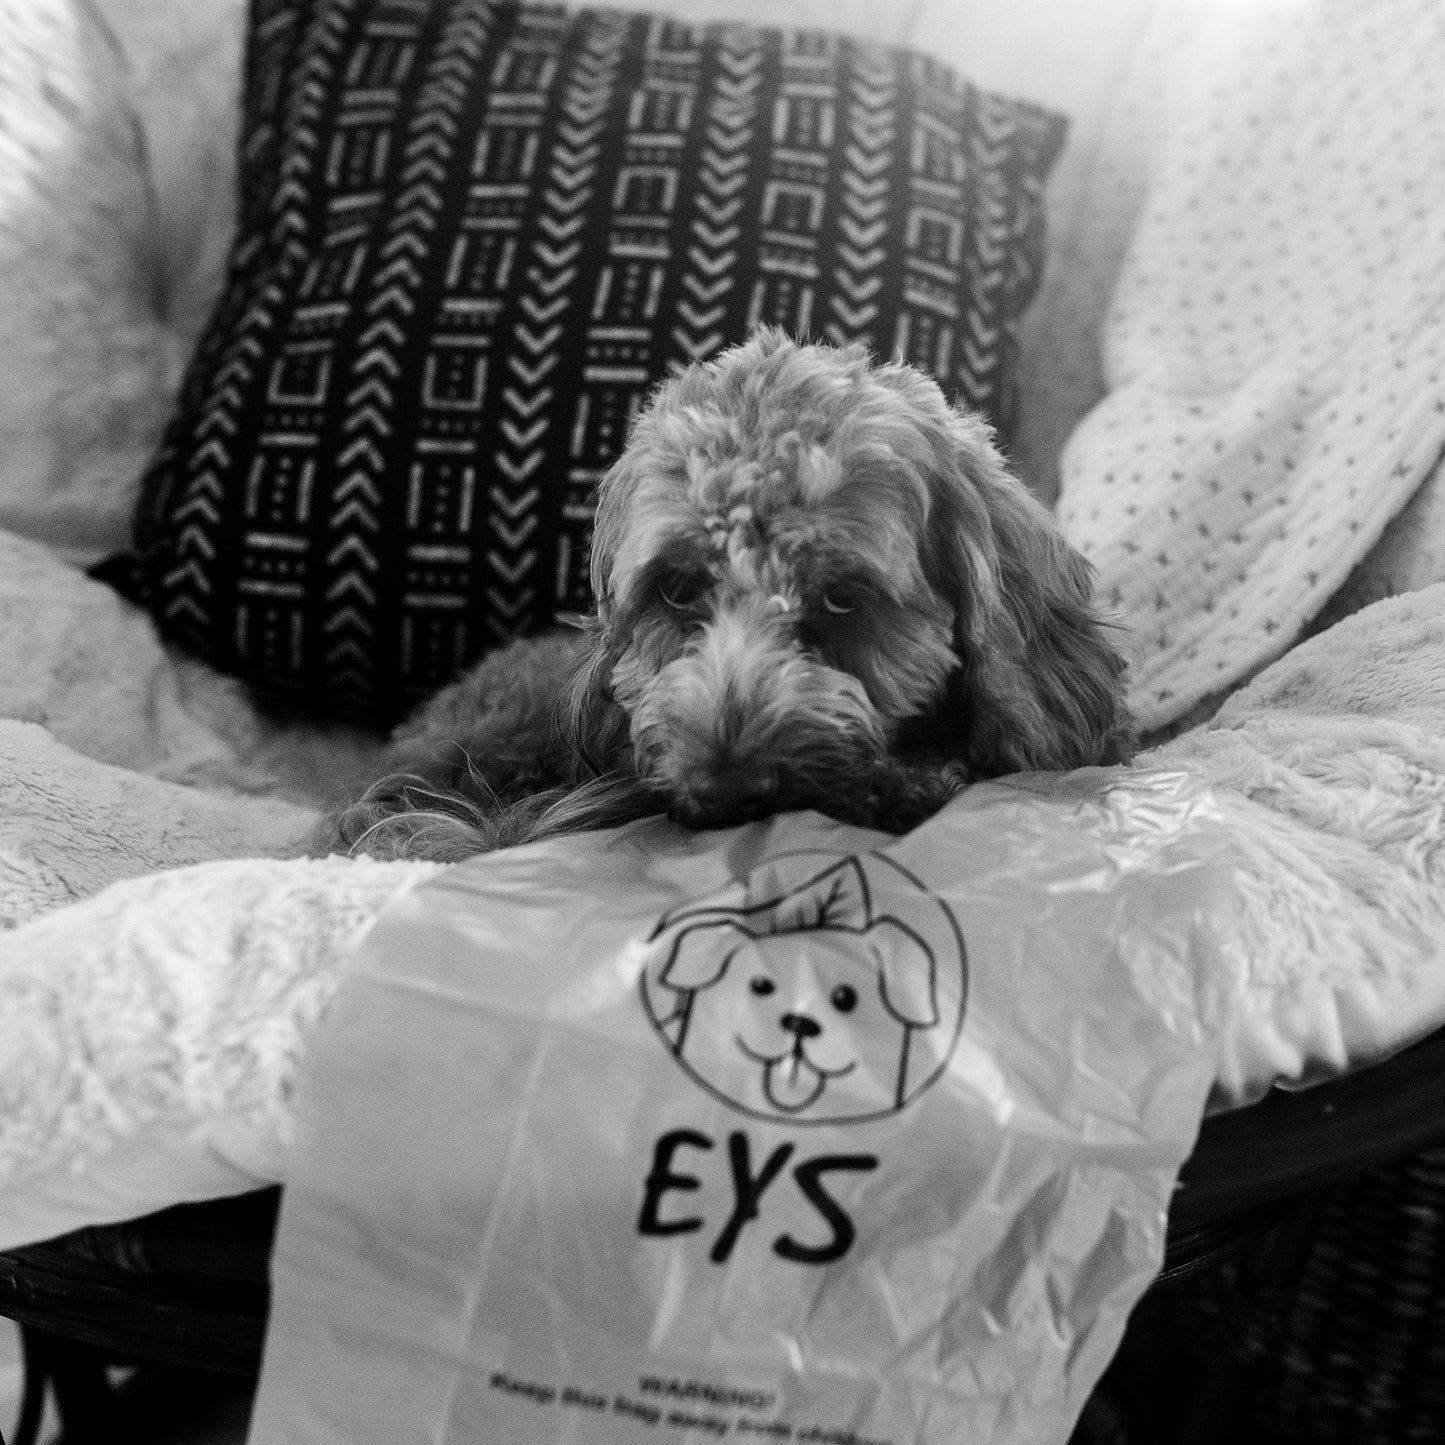 E Y S  Lavender-Scented Eco-Friendly  Dog Poop Bags